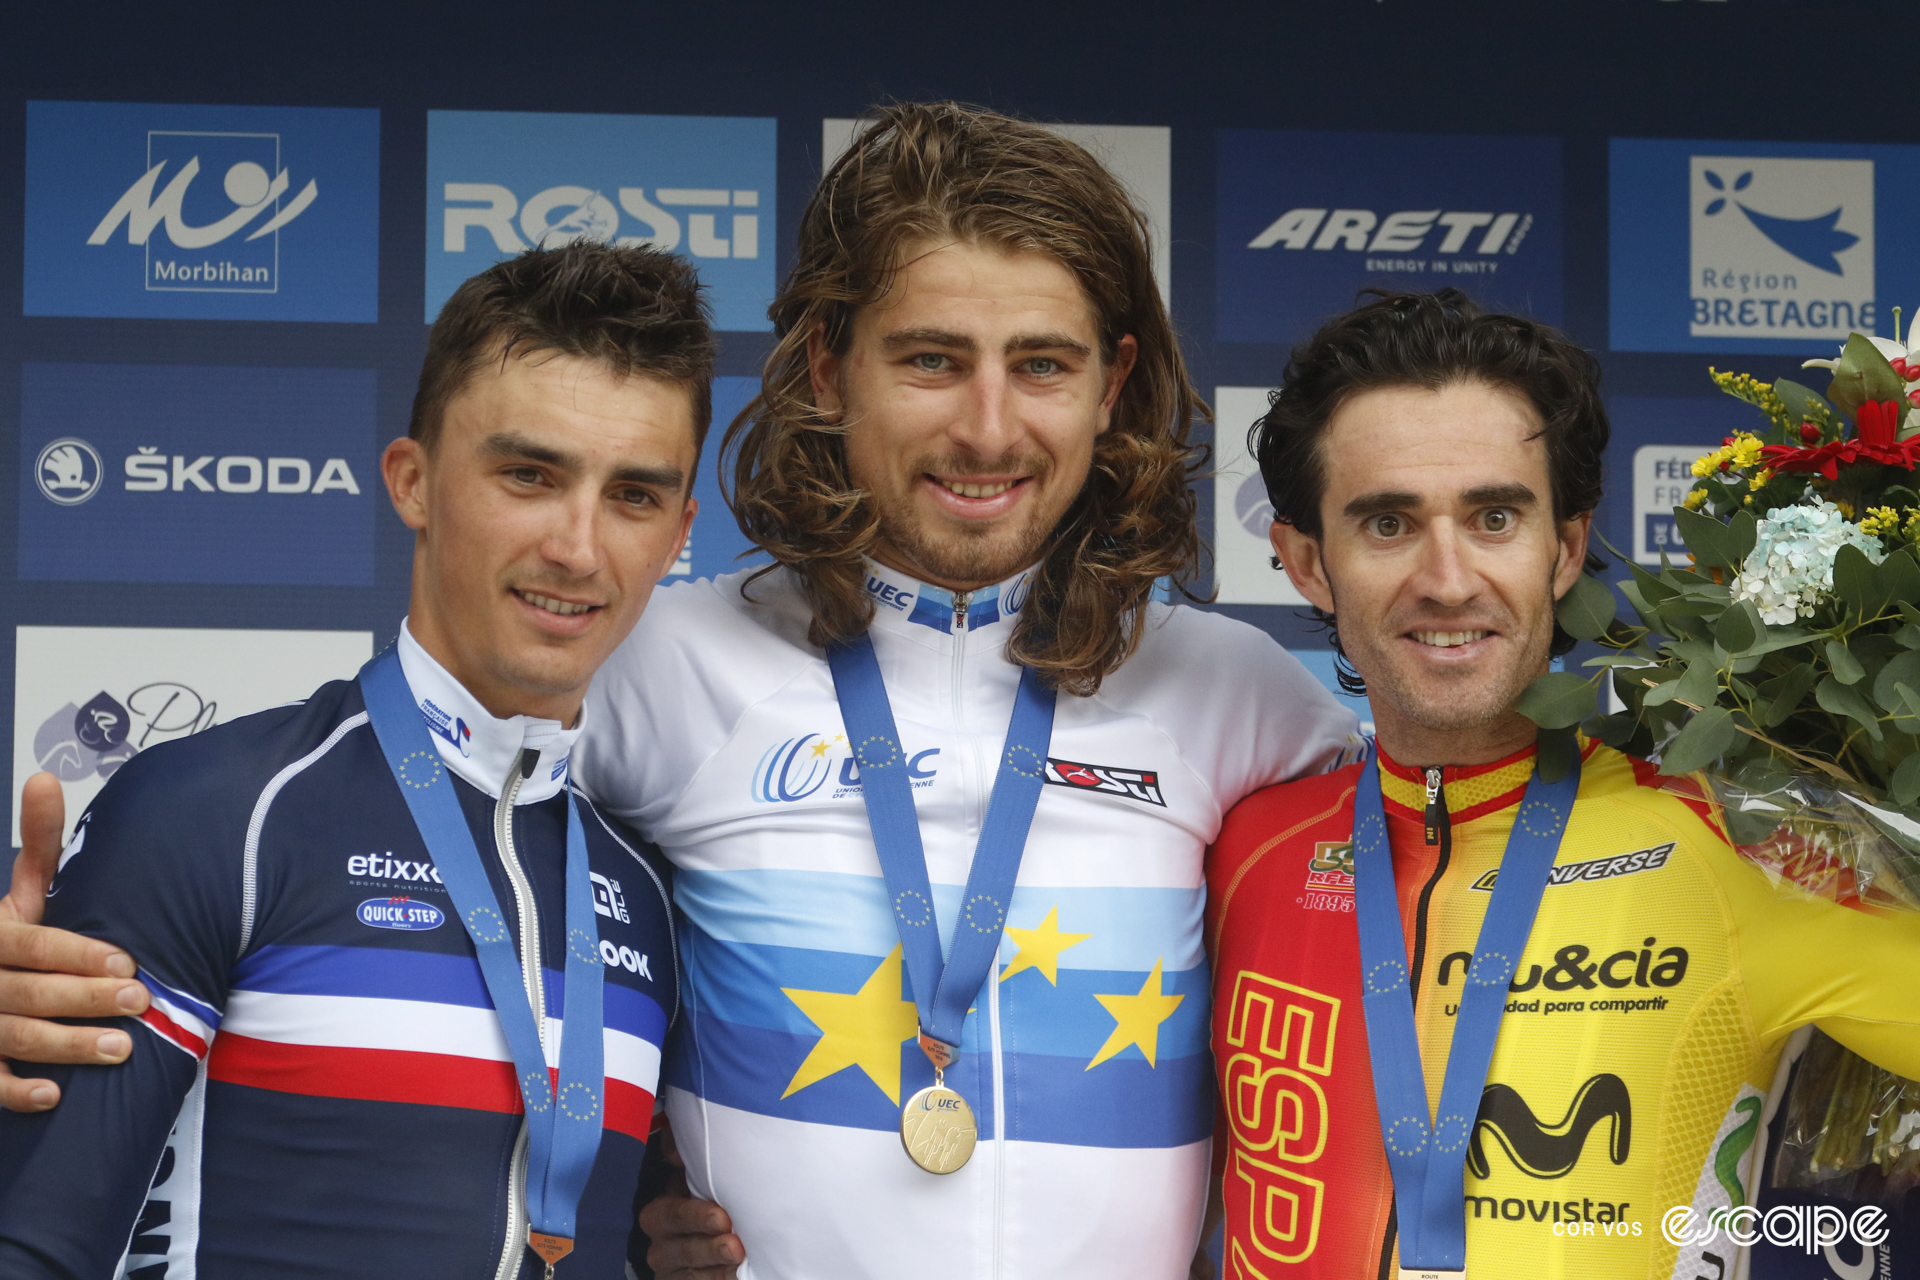 Peter Sagan on the podium at the 2016 European road championships, wearing the blue and white continental champion's jersey and a gold medal, flanked by Julian Alaphilippe and Dani Moreno.